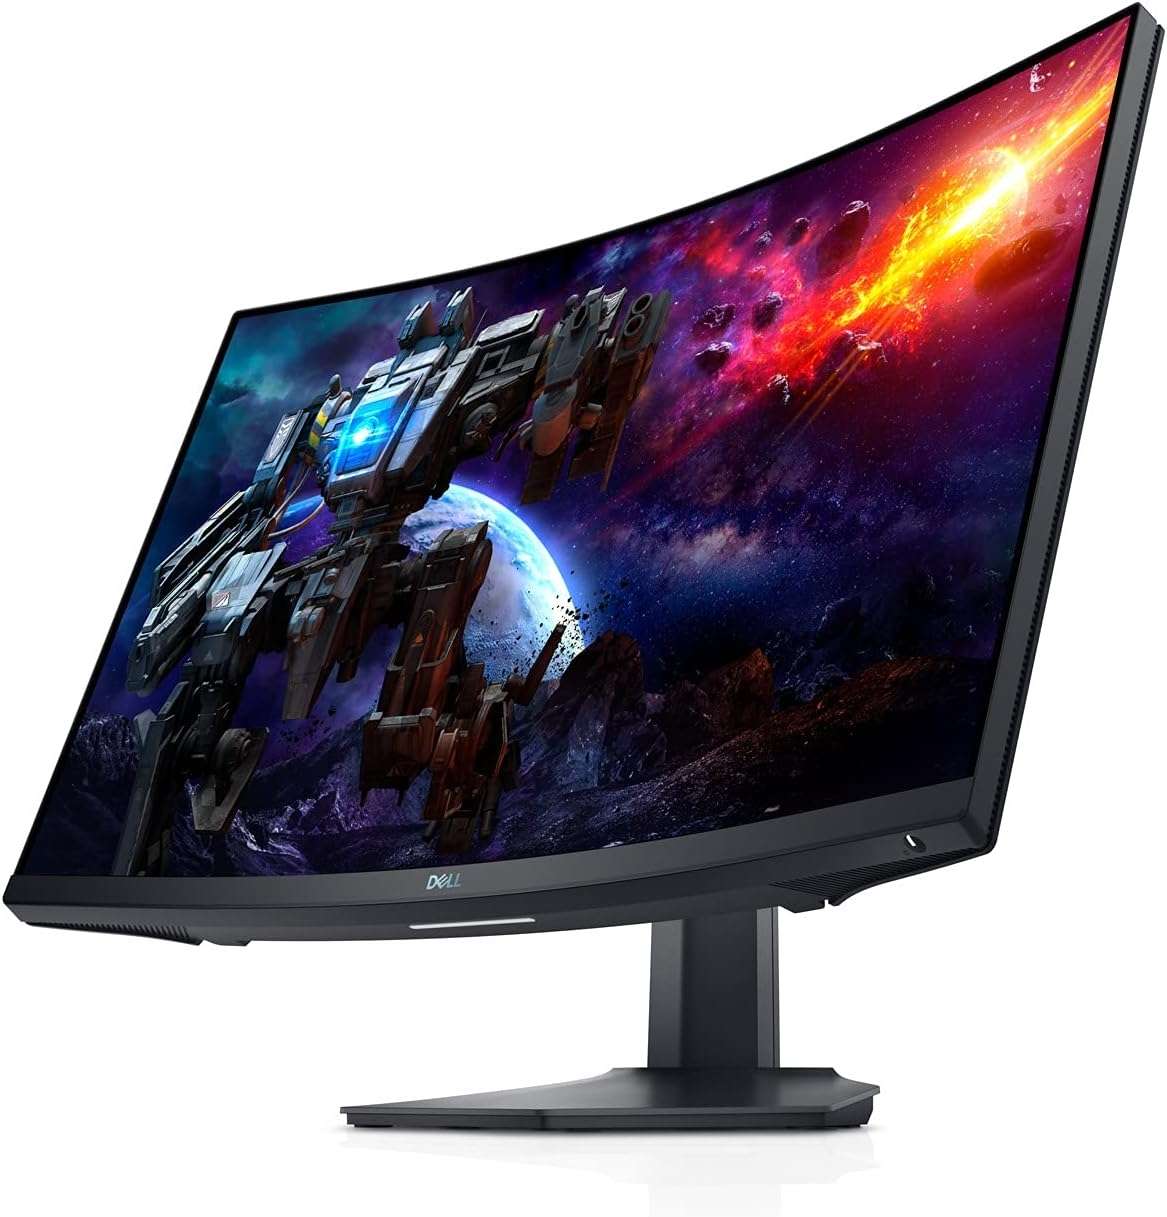 Dell 27 inch curved gaming monitor